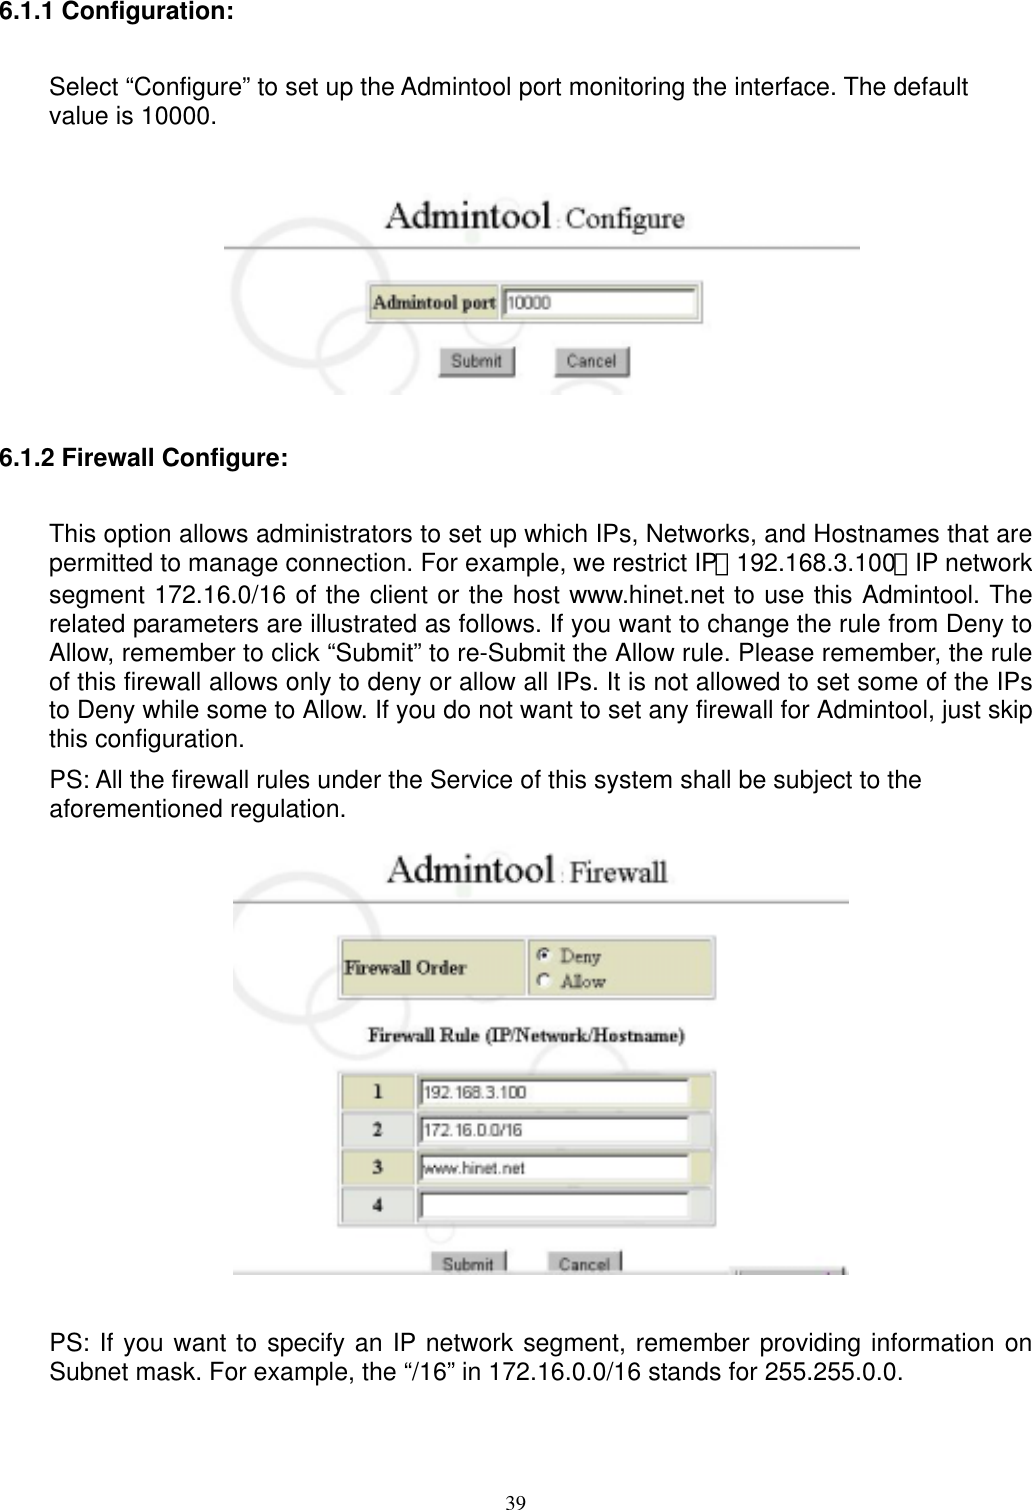  396.1.1 Configuration:   Select “Configure” to set up the Admintool port monitoring the interface. The default value is 10000.   6.1.2 Firewall Configure:   This option allows administrators to set up which IPs, Networks, and Hostnames that are permitted to manage connection. For example, we restrict IP：192.168.3.100、IP network segment 172.16.0/16 of the client or the host www.hinet.net to use this Admintool. The related parameters are illustrated as follows. If you want to change the rule from Deny to Allow, remember to click “Submit” to re-Submit the Allow rule. Please remember, the rule of this firewall allows only to deny or allow all IPs. It is not allowed to set some of the IPs to Deny while some to Allow. If you do not want to set any firewall for Admintool, just skip this configuration. PS: All the firewall rules under the Service of this system shall be subject to the aforementioned regulation.   PS: If you want to specify an IP network segment, remember providing information on Subnet mask. For example, the “/16” in 172.16.0.0/16 stands for 255.255.0.0. 